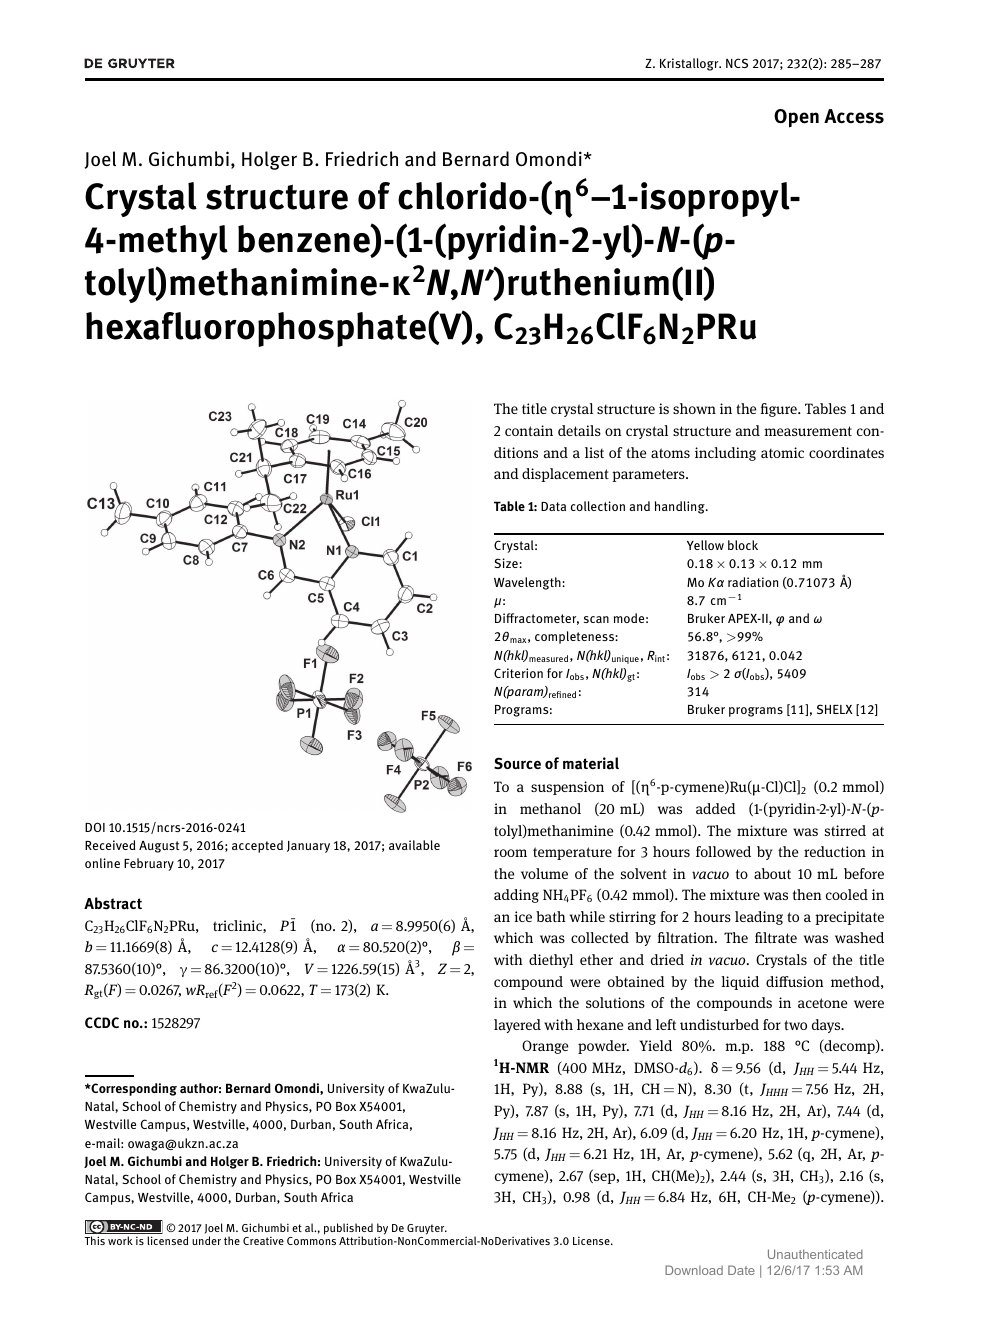 Crystal Structure Of Chlorido H6 1 Isopropyl 4 Methyl Benzene 1 Pyridin 2 Yl N P Tolyl Methanimine K2n N Ruthenium Ii Hexafluorophosphate V C23h26clf6n2pru Topic Of Research Paper In Chemical Sciences Download Scholarly Article Pdf And